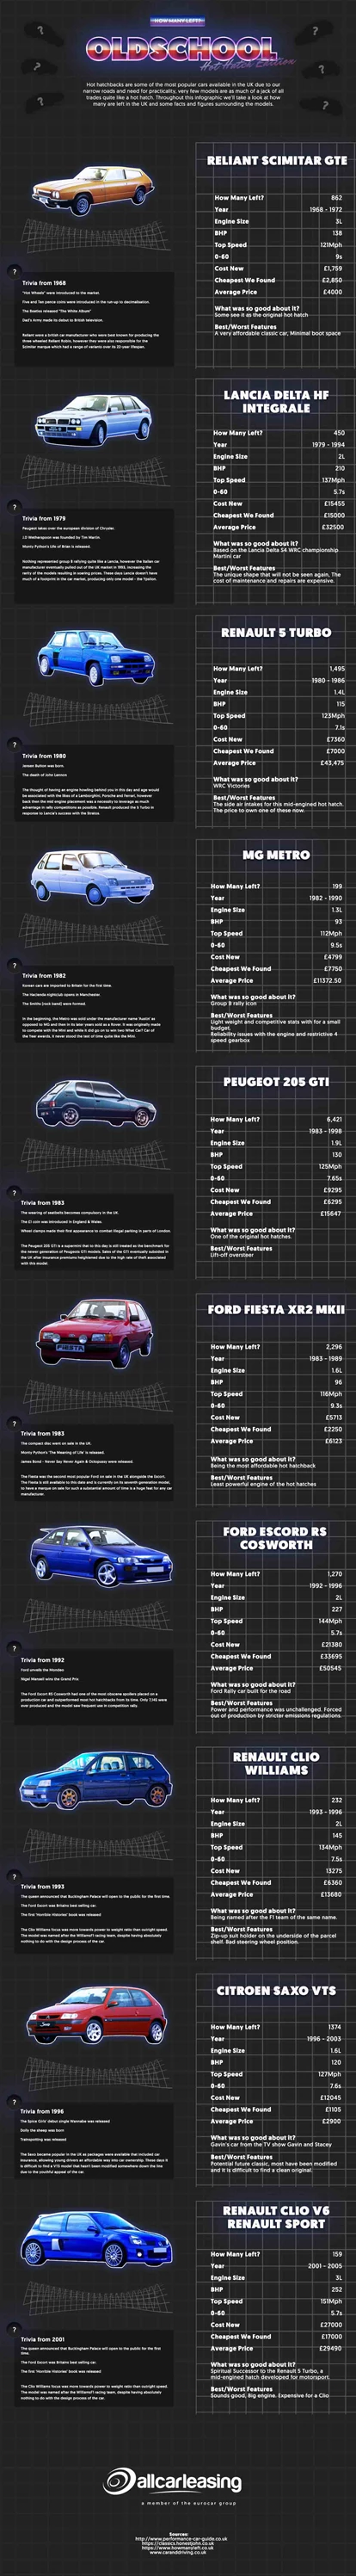 Old School Hot Hatches Infographic